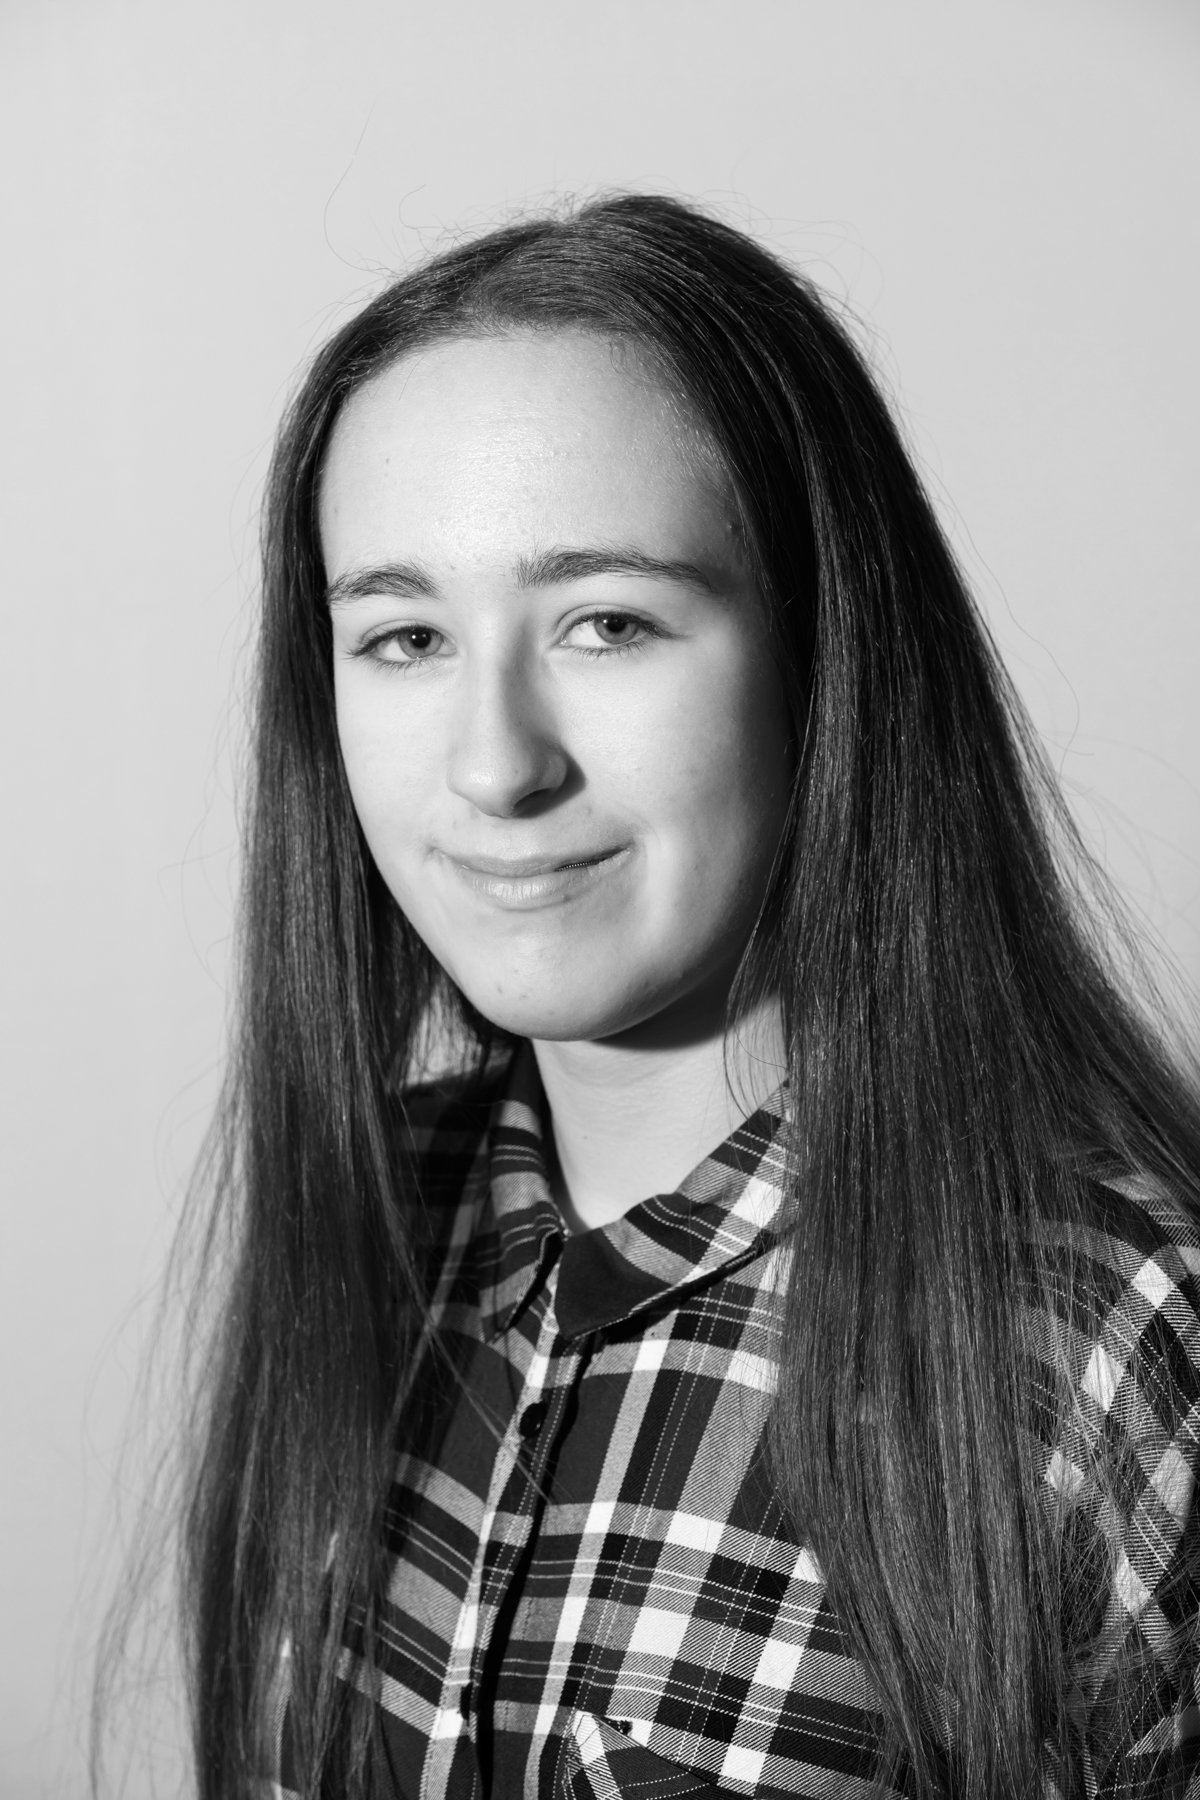 Ellie Goldwater plays Lisa. She has been acting since she was 14. Her favourite thing about Hunt is the interesting dynamic between characters and the way they interact. Ellie loves that joining TRY has created friendships for her.